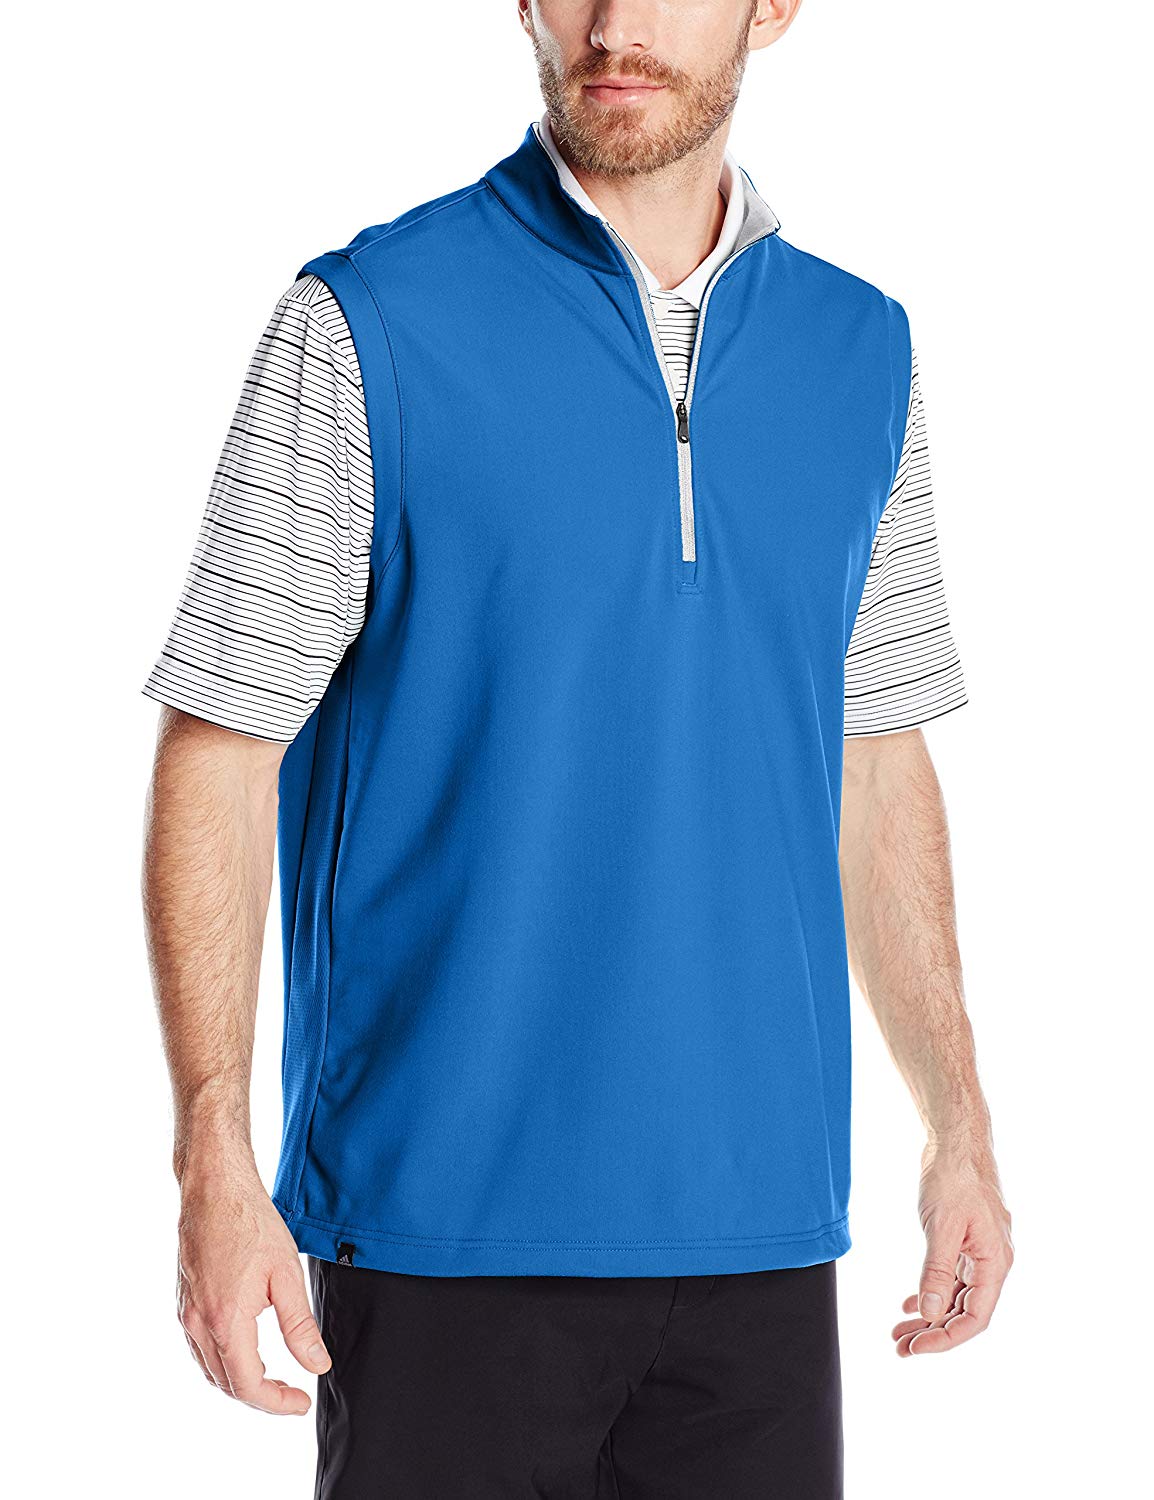 Adidas Mens Climacool Competition Golf Vests